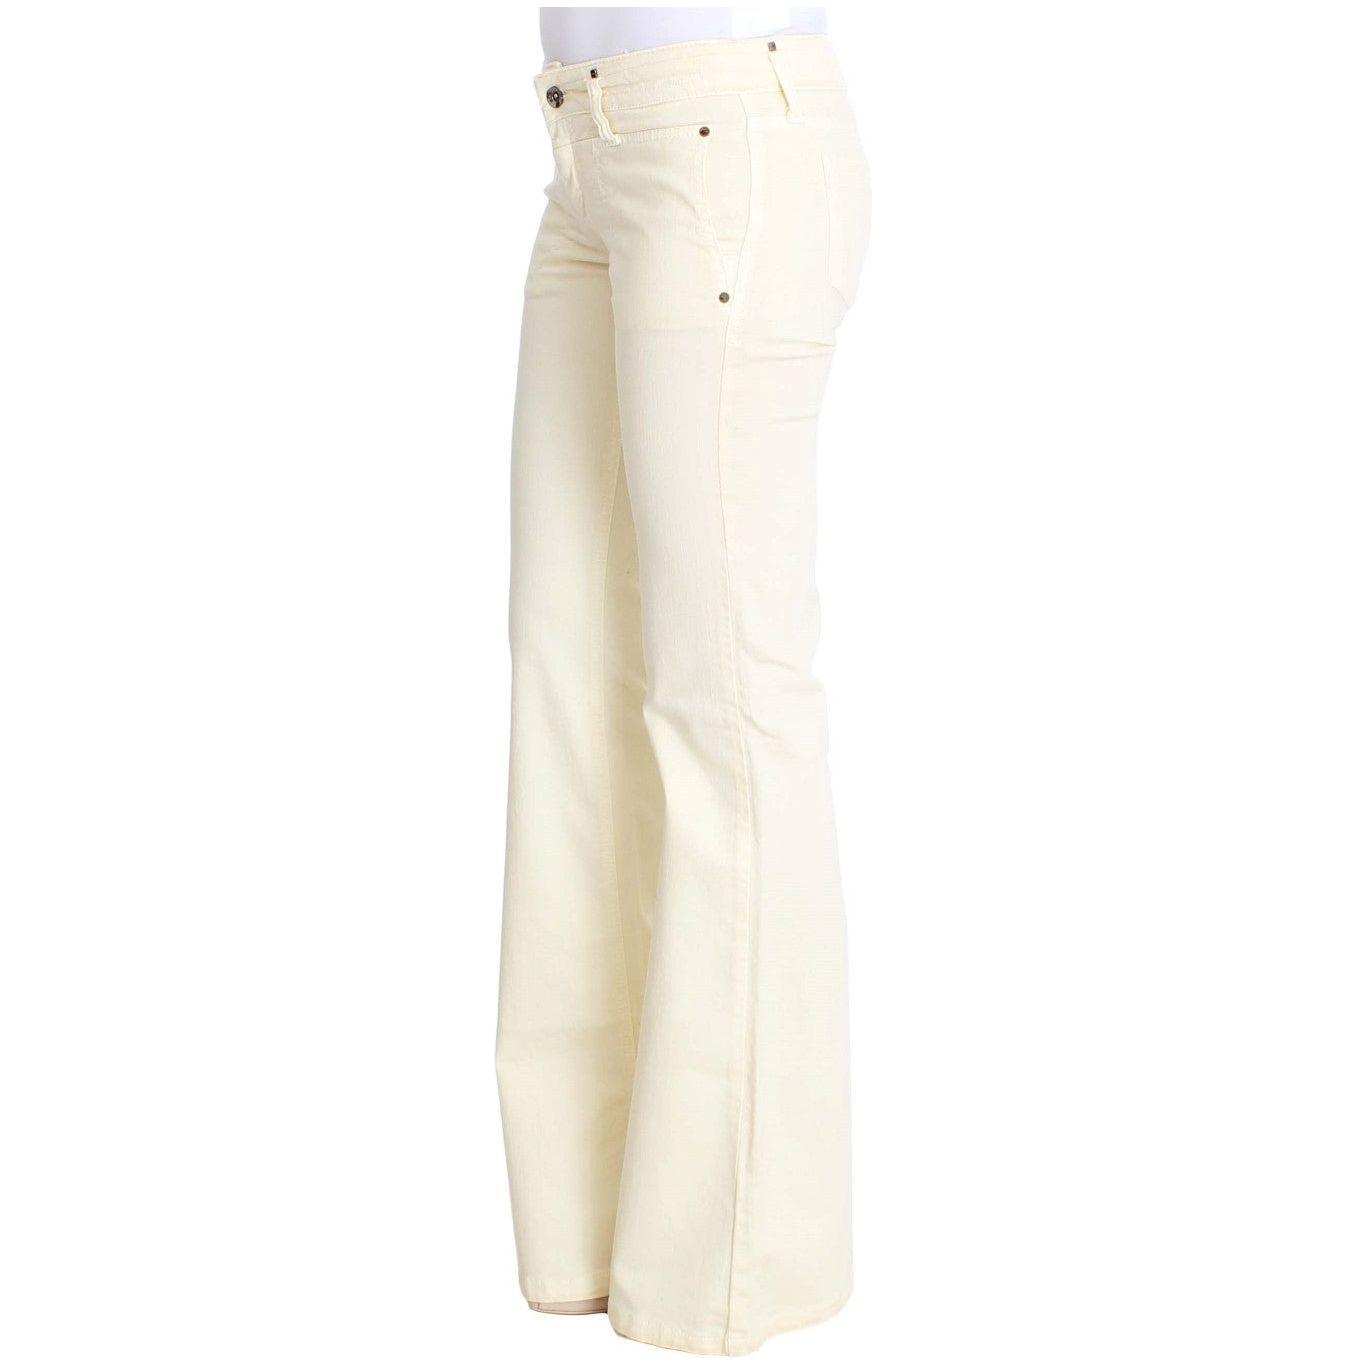 Costume National Chic Off-White Flared Designer Jeans white-cotton-stretch-flare-jeans